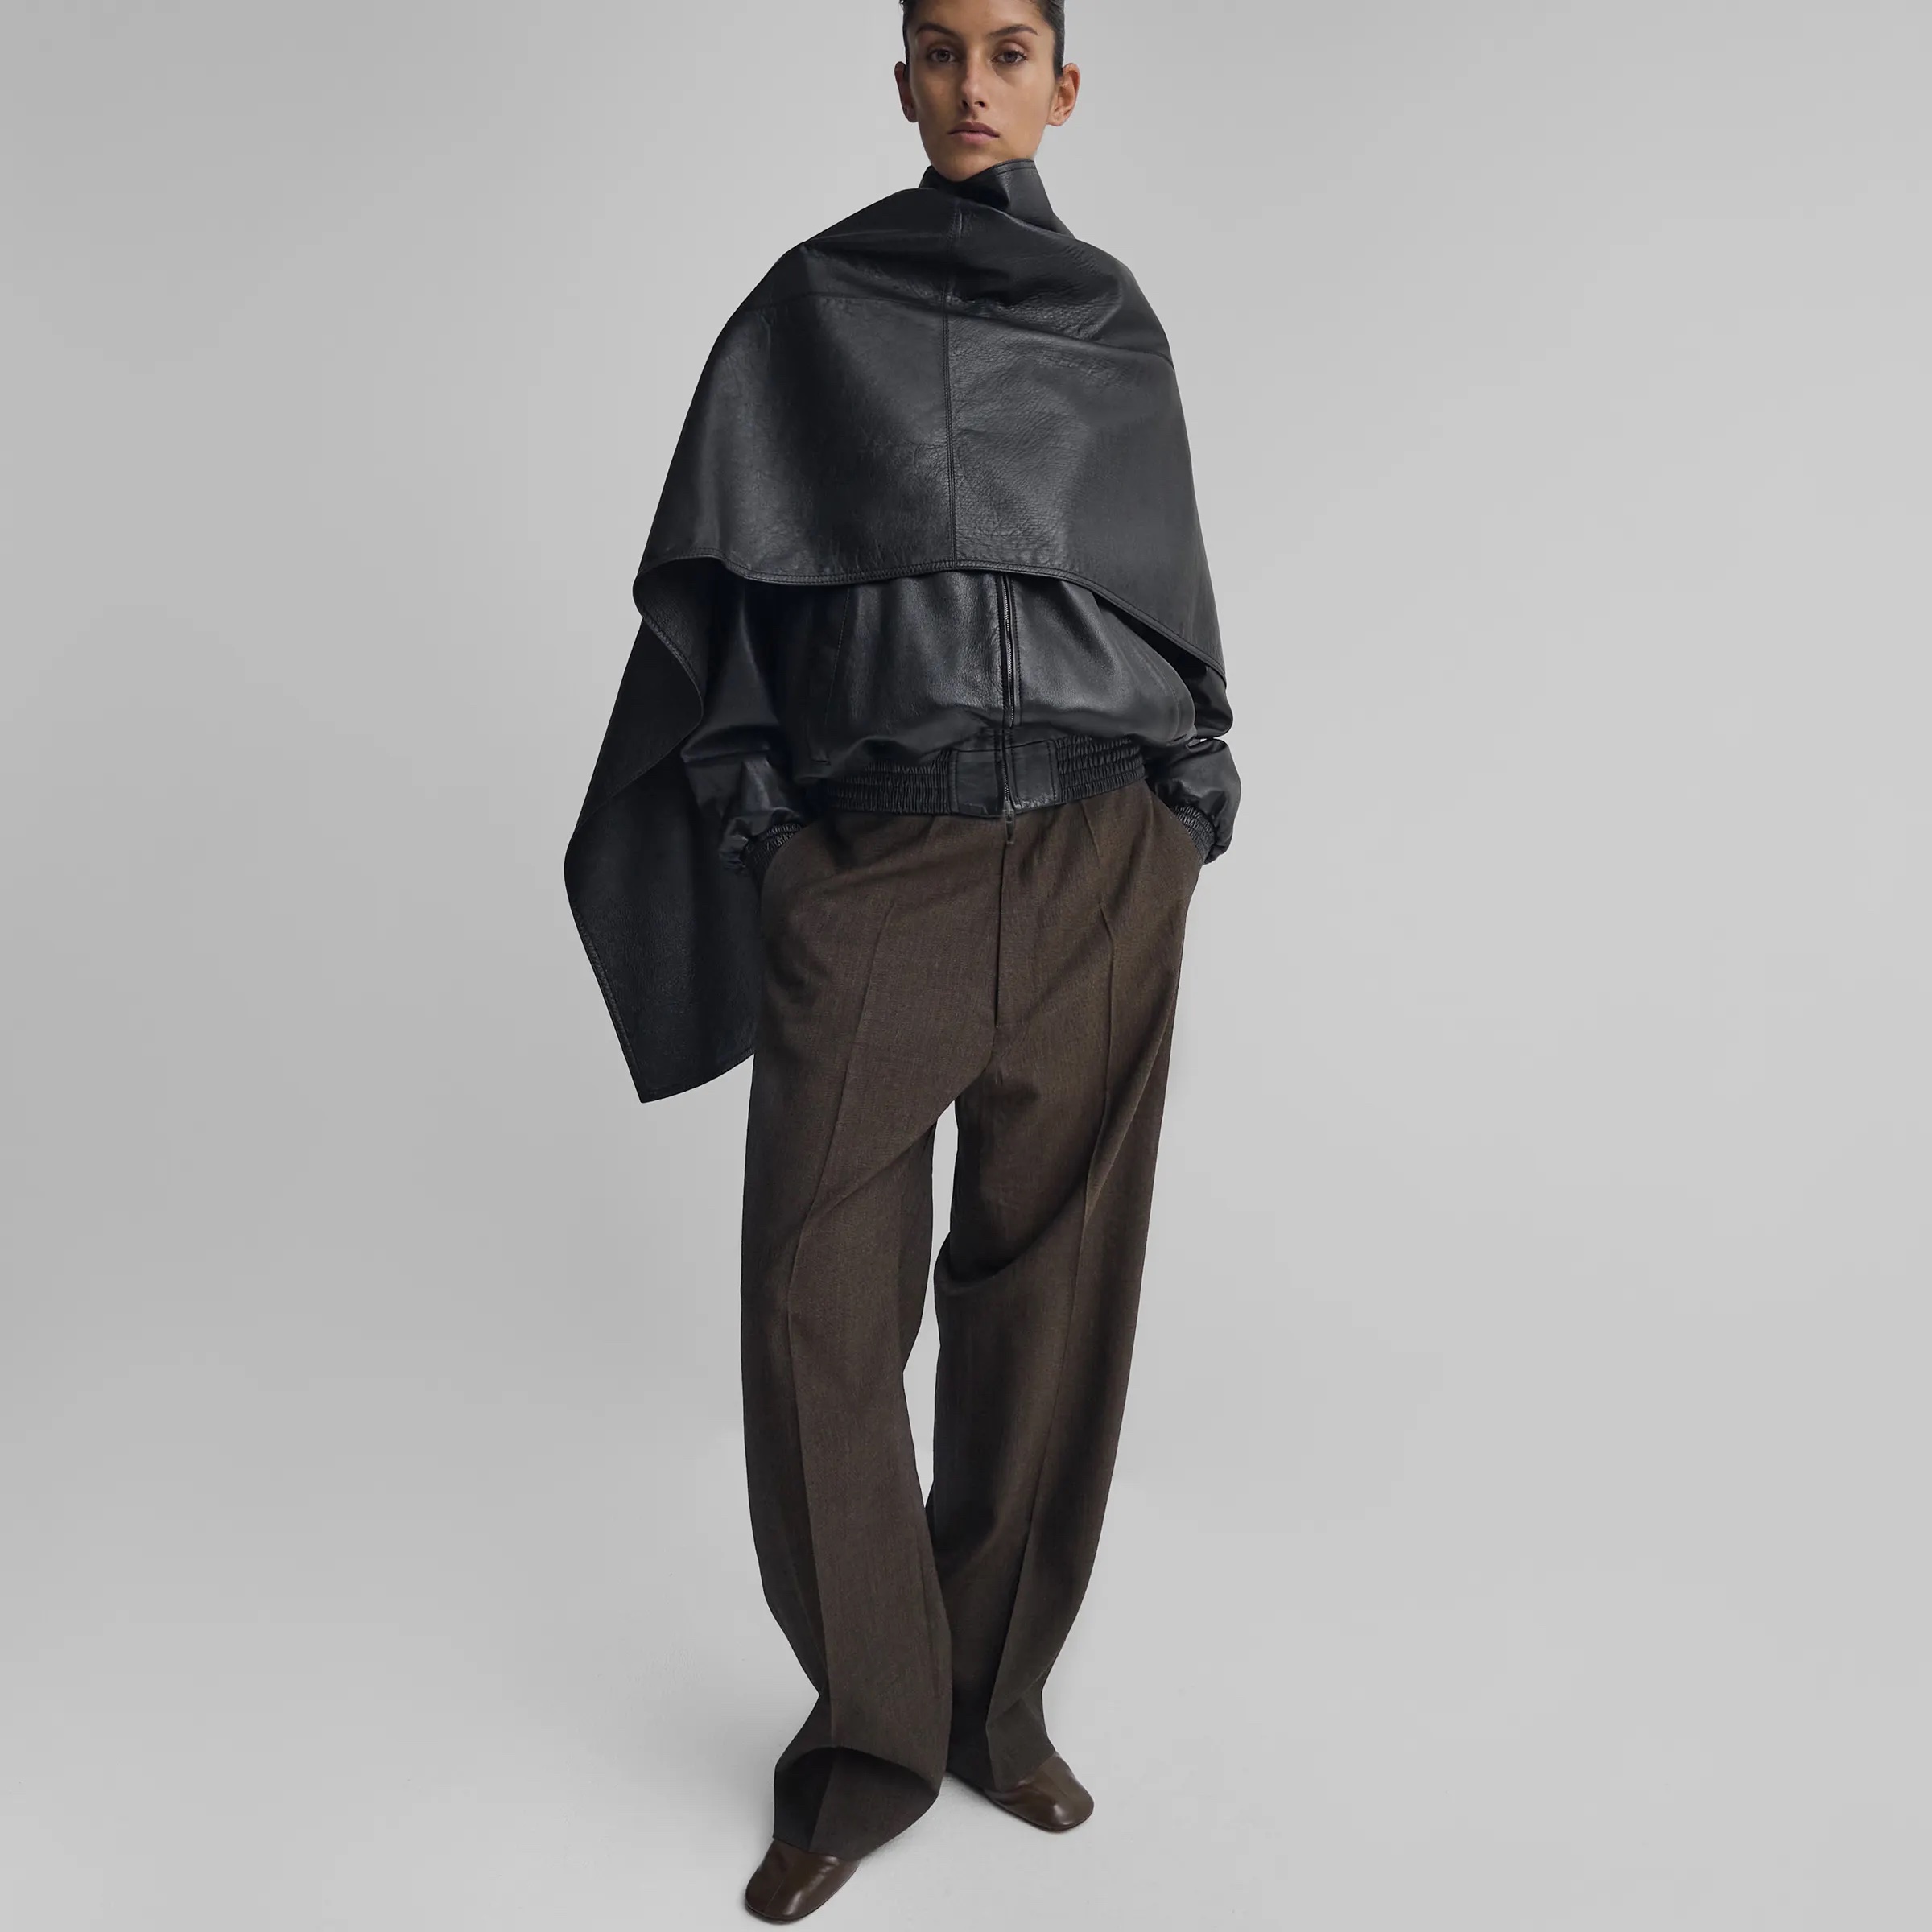 Phoebe Philo's Eponymous Brand Has Just Launched Online | Who What Wear UK